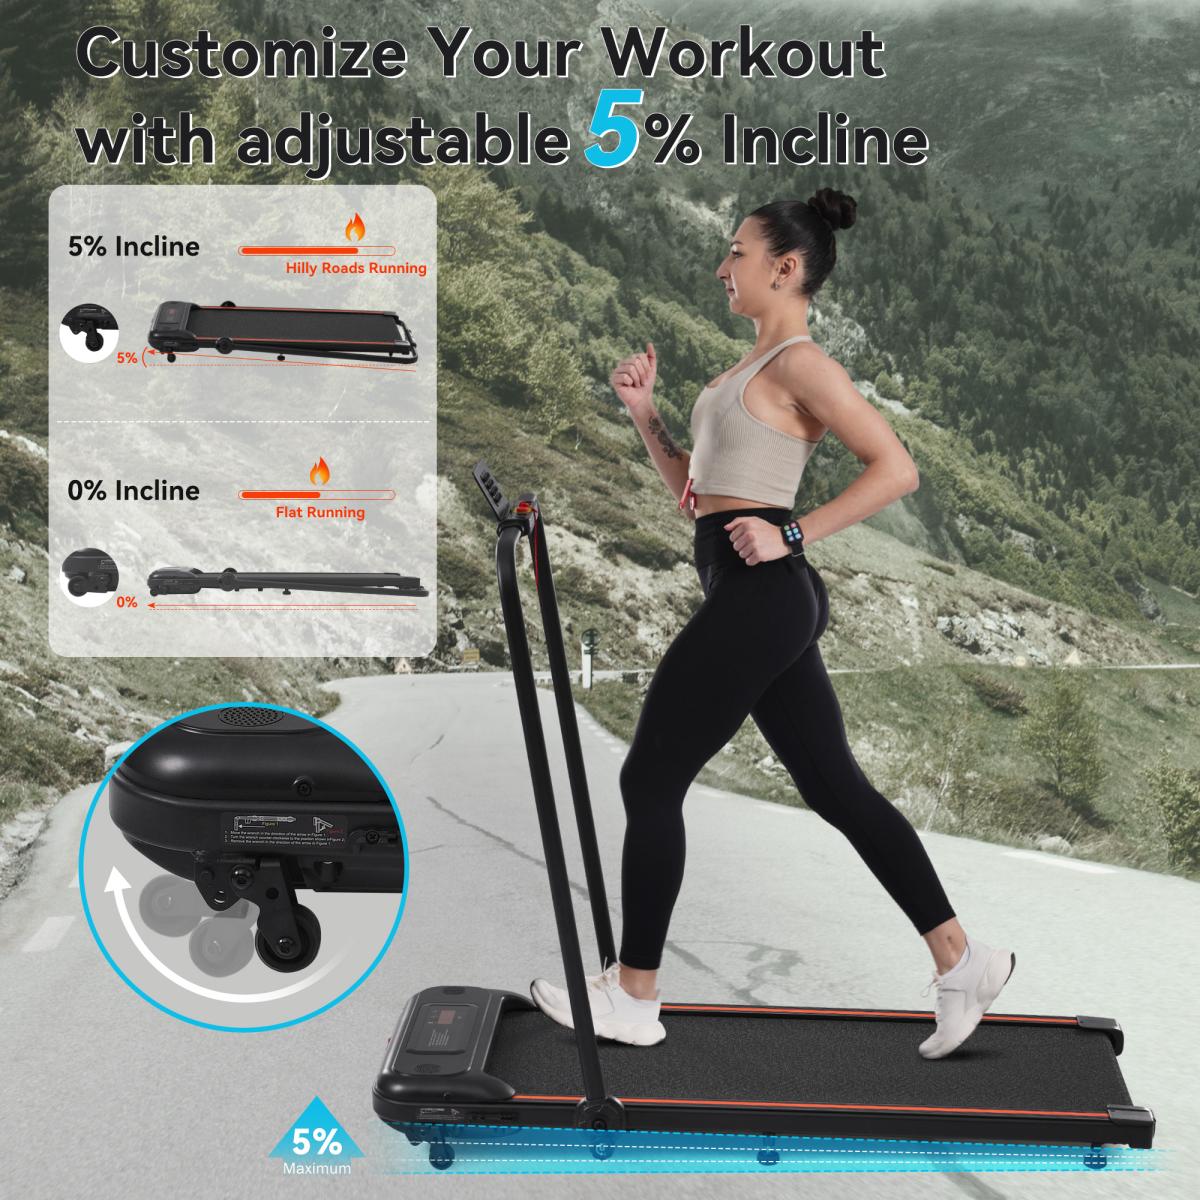 Folding Walking Pad Under Desk Treadmill for Home Office -2.5hp Walking Treadmill With Incline Bluetooth Speaker 0.5-7.5mph 265lbs Capacity Treadmill for Walking Running - Two Ways to Adjust Speed